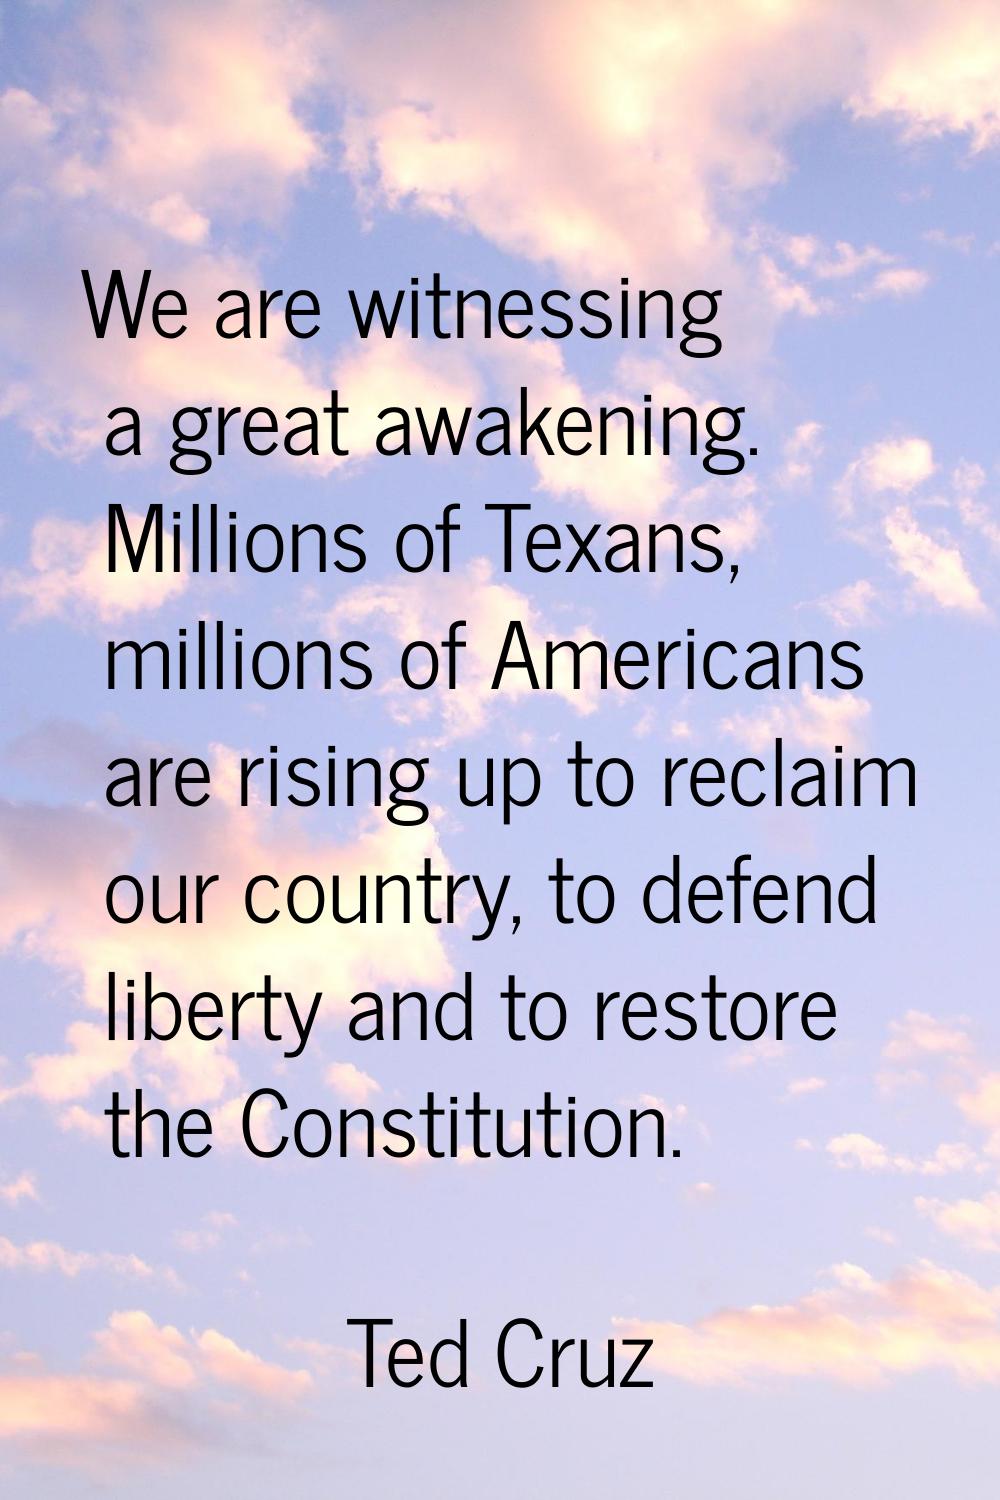 We are witnessing a great awakening. Millions of Texans, millions of Americans are rising up to rec